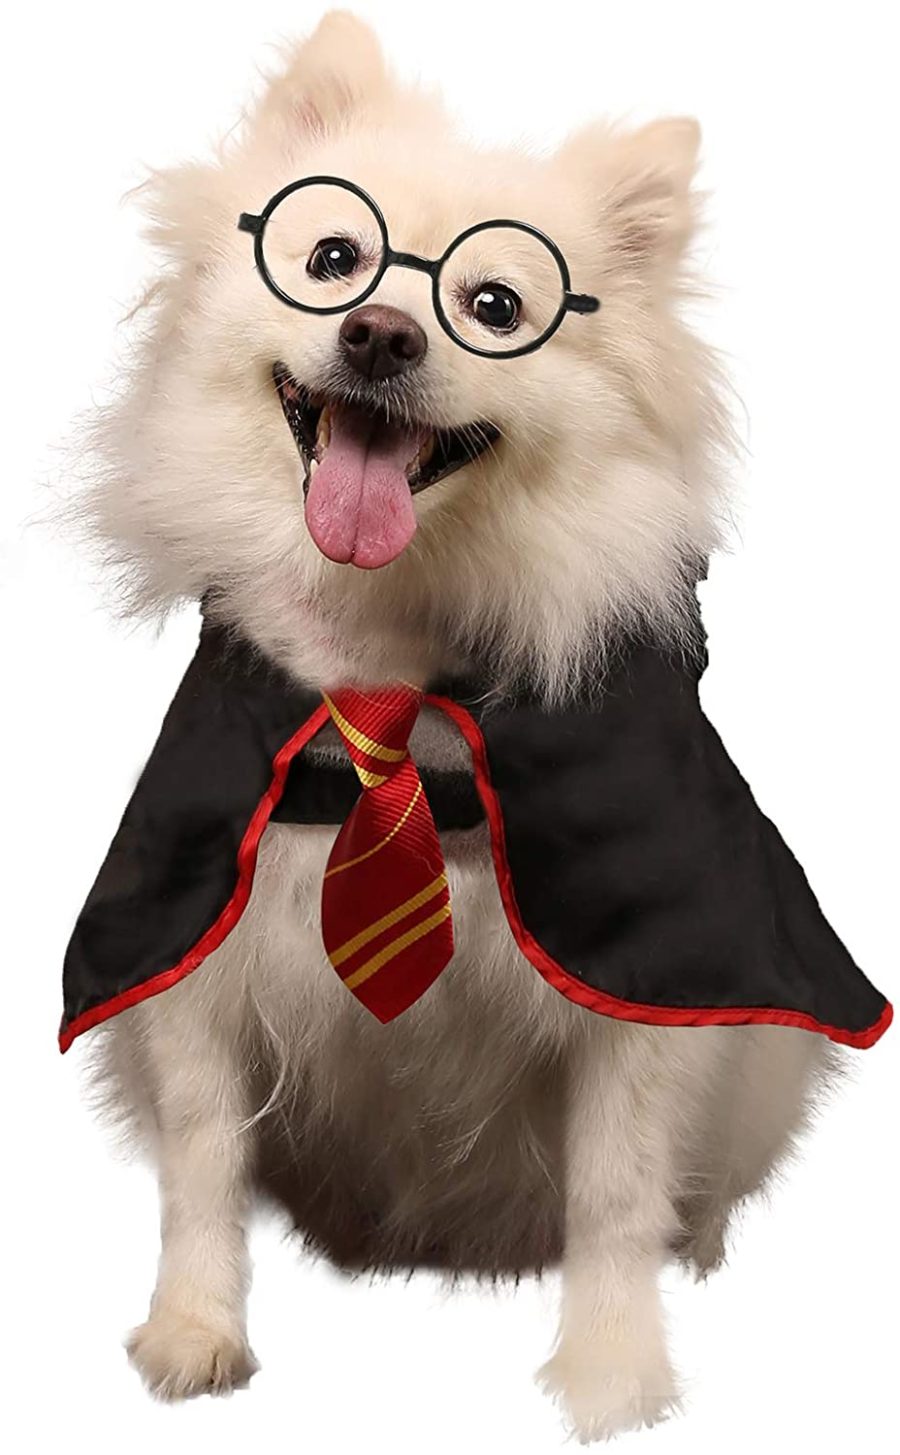 Harry Potter Dog Names (& Their Meanings!)